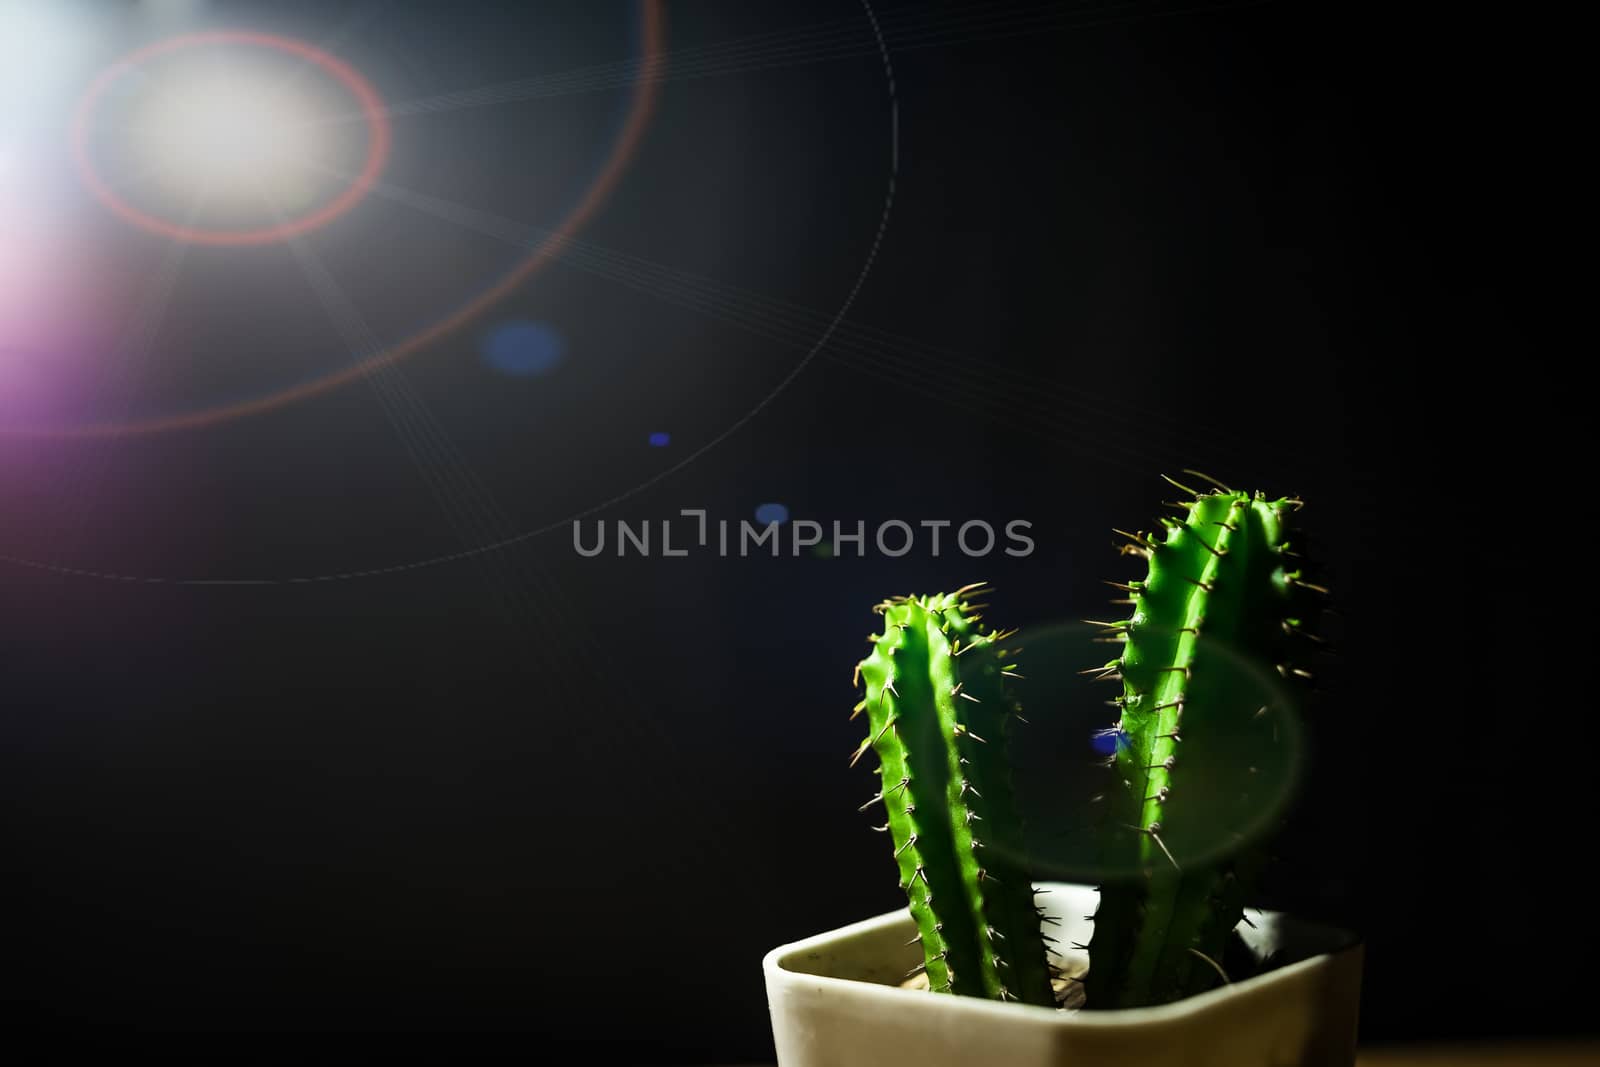 A close-up shot of a small green cactus shining and a black background.